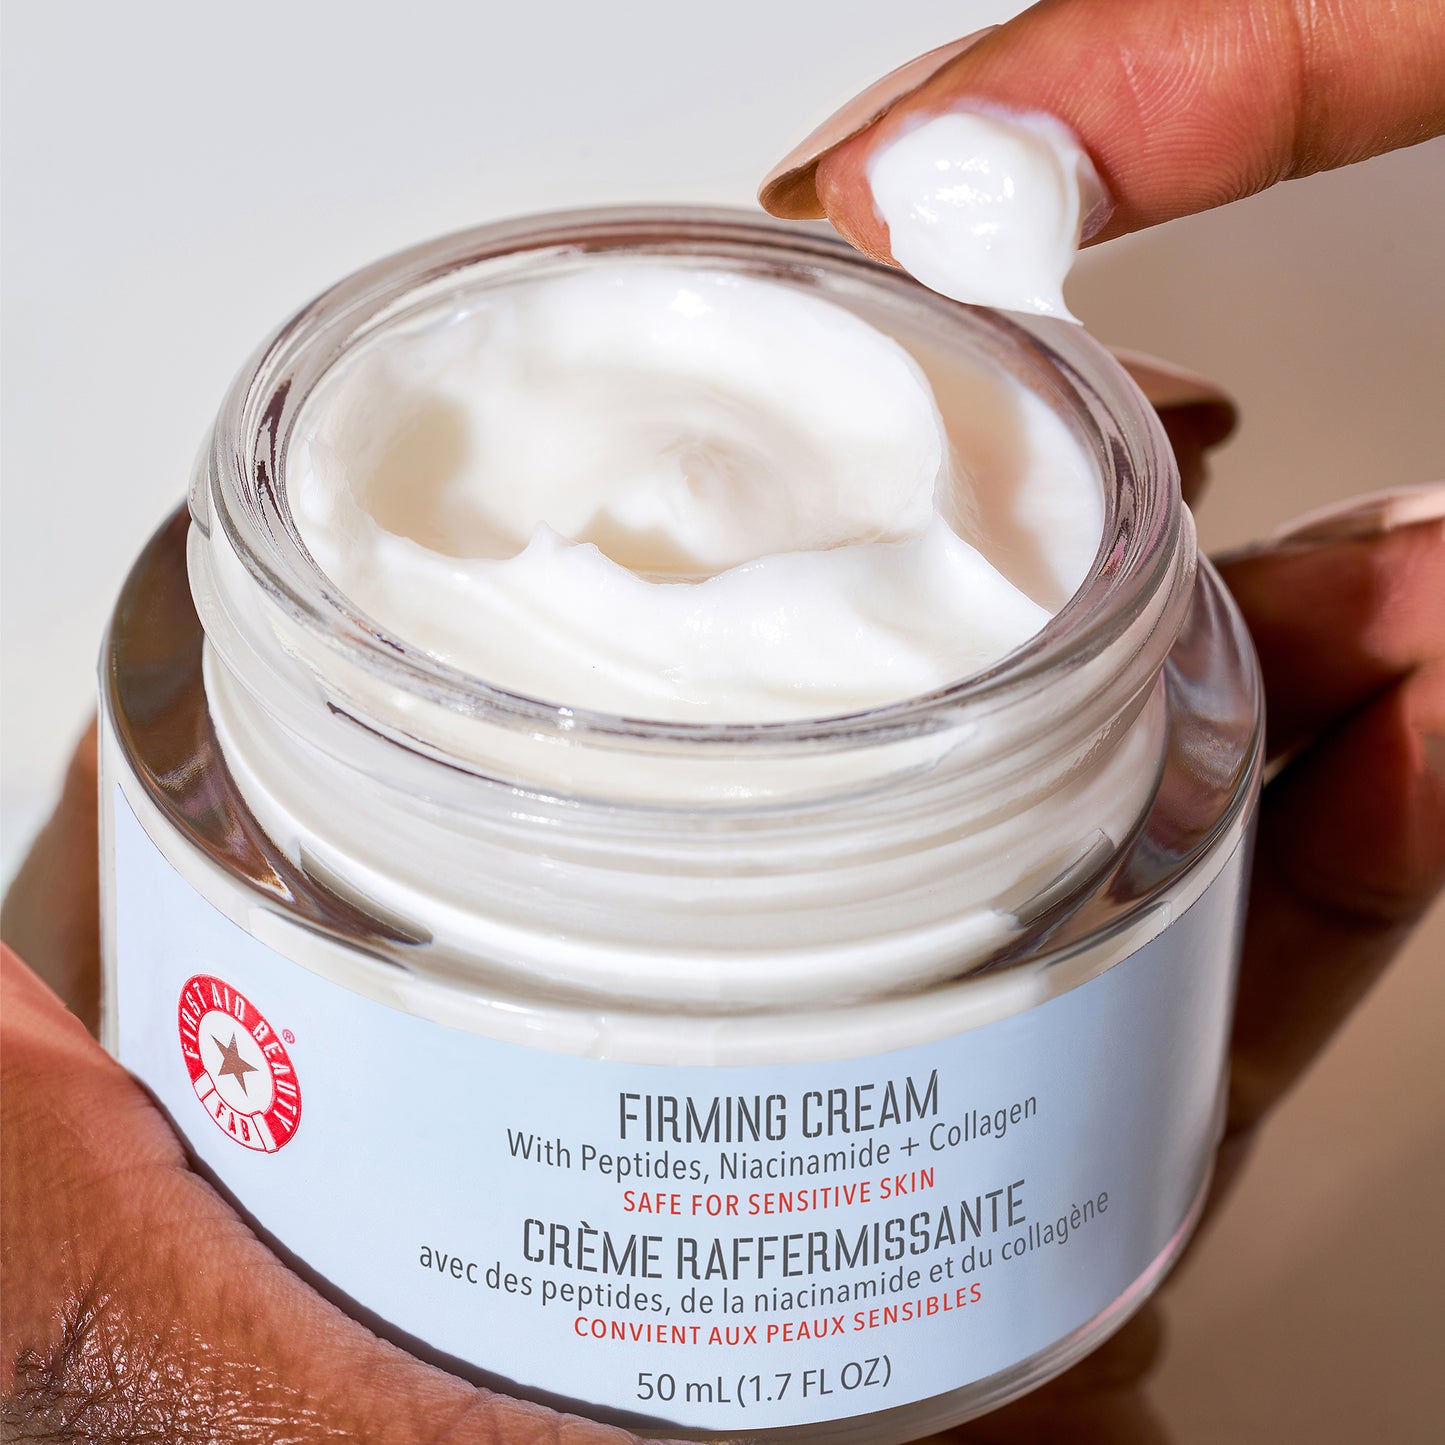 Firming Cream with Peptides + Niacinamide + Collagen